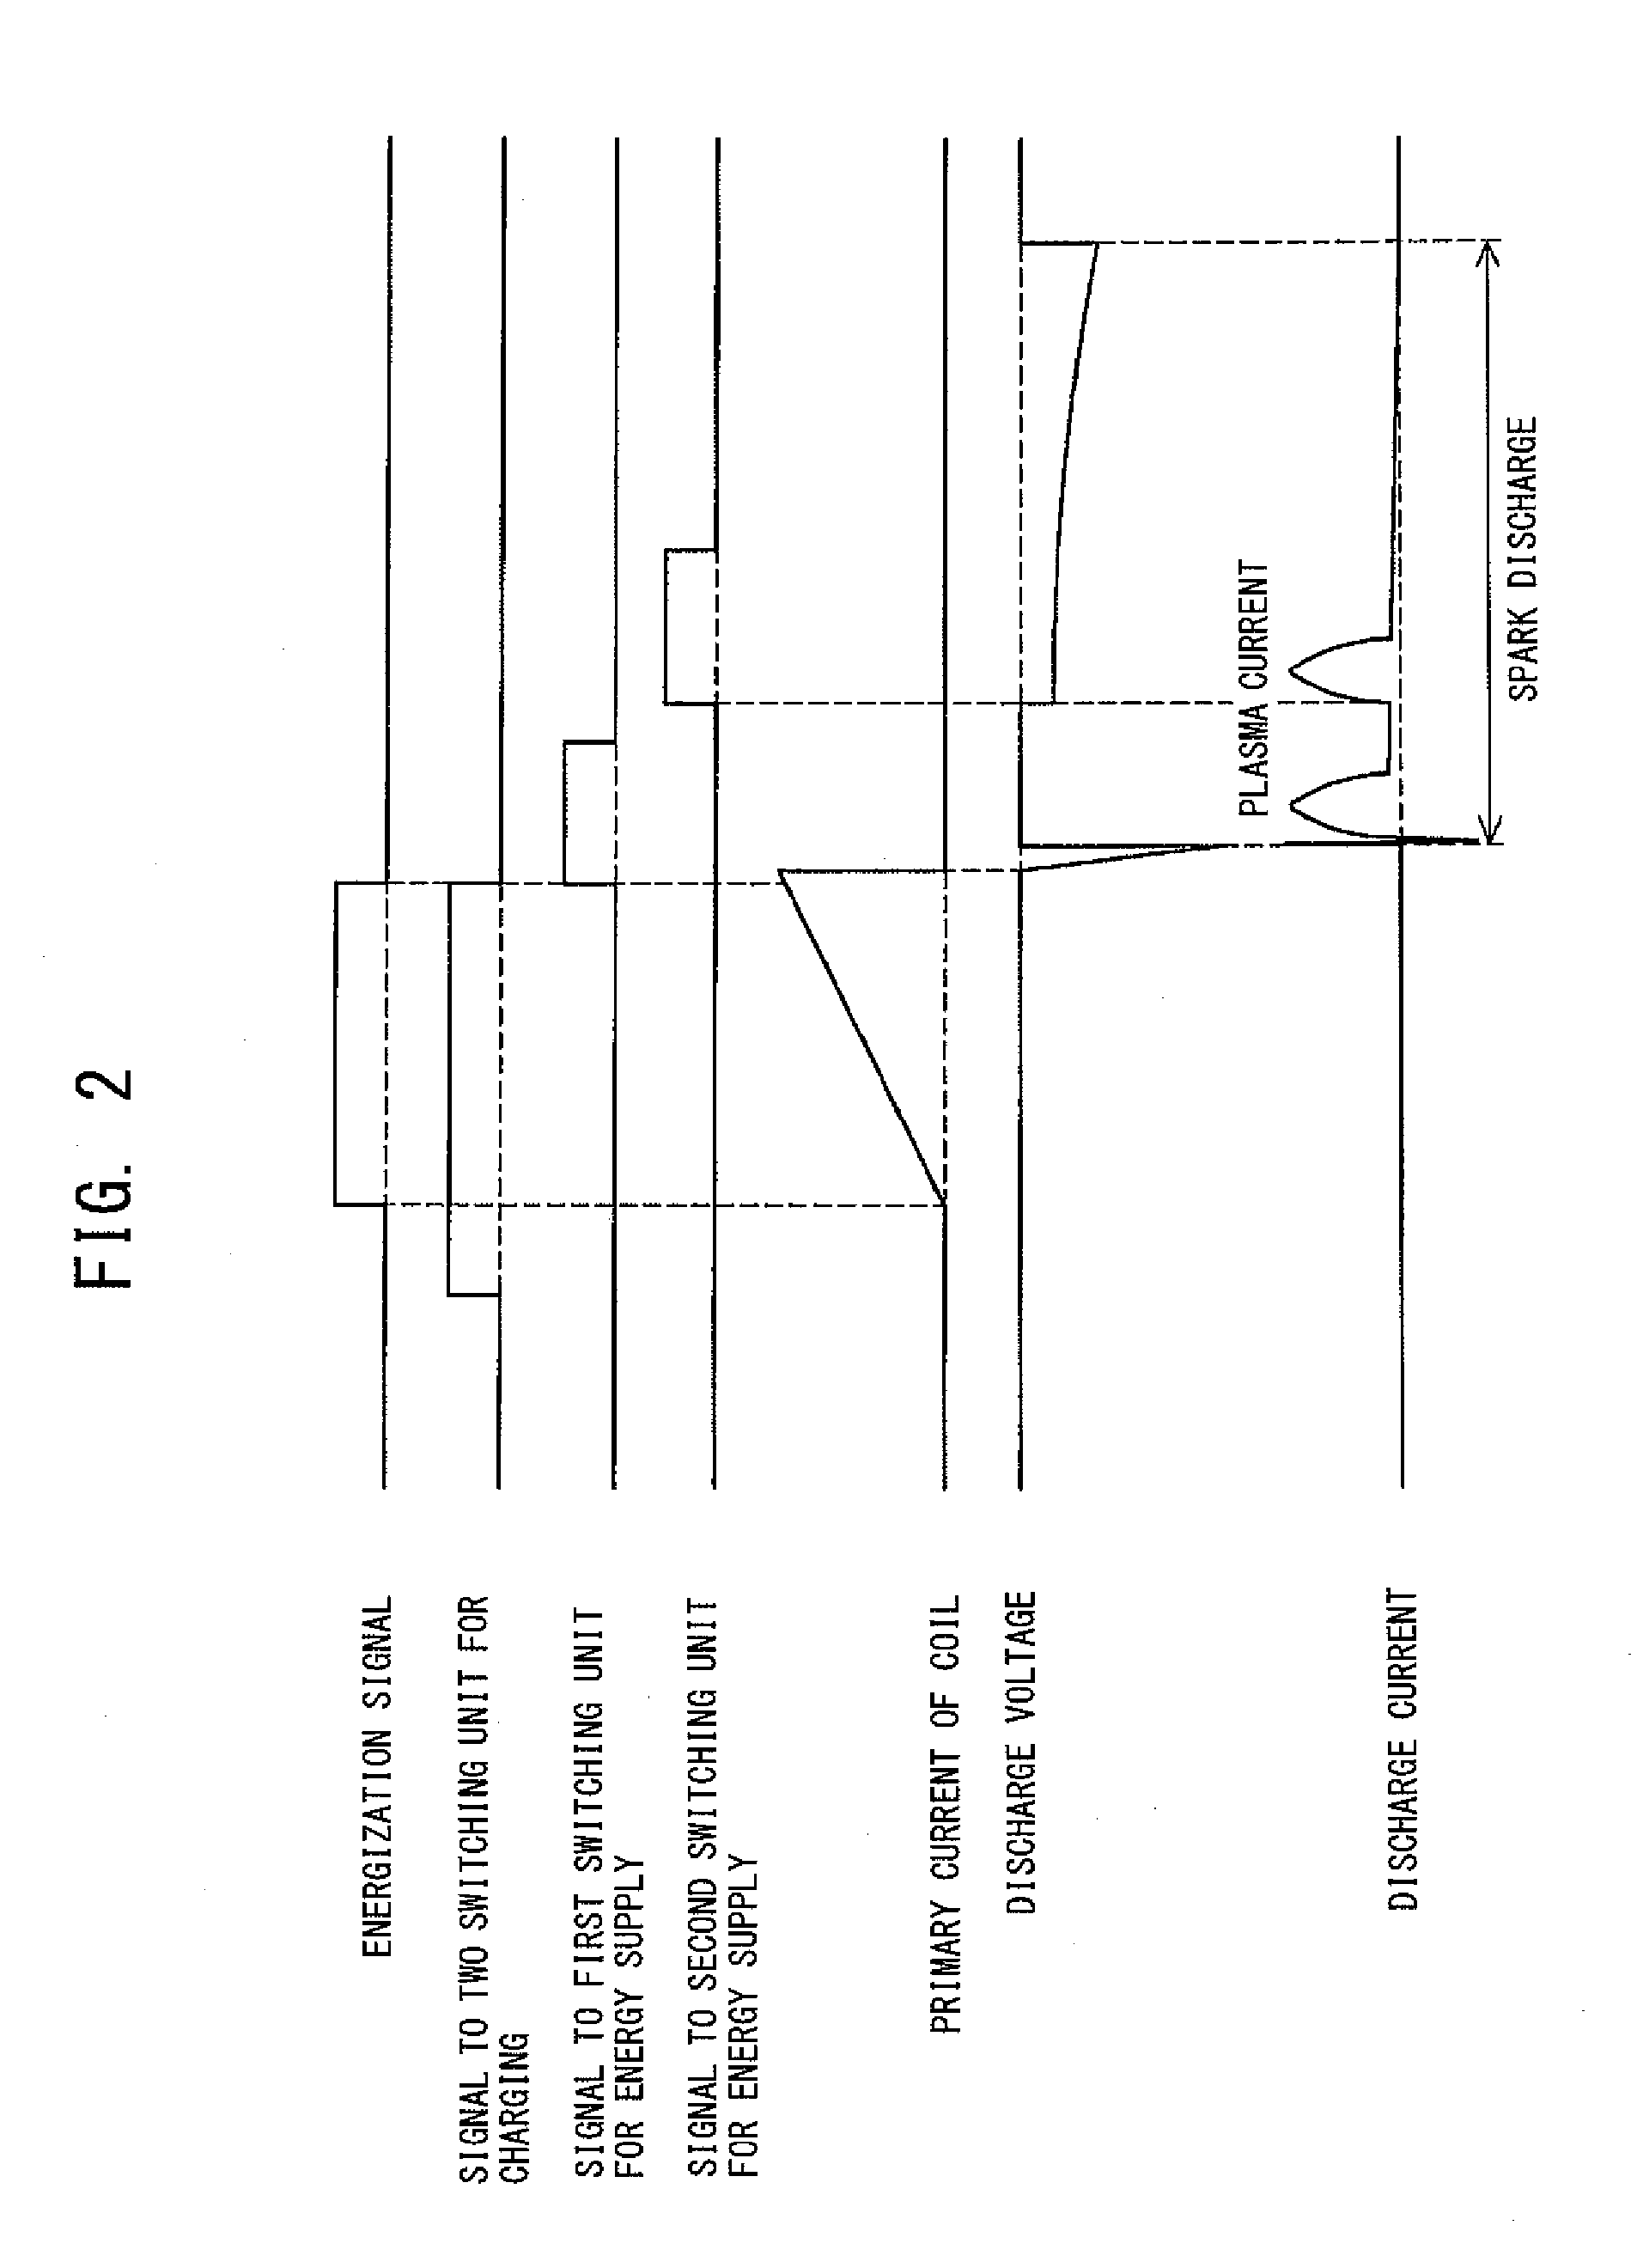 Ignition apparatus for plasma jet ignition plug and ignition system